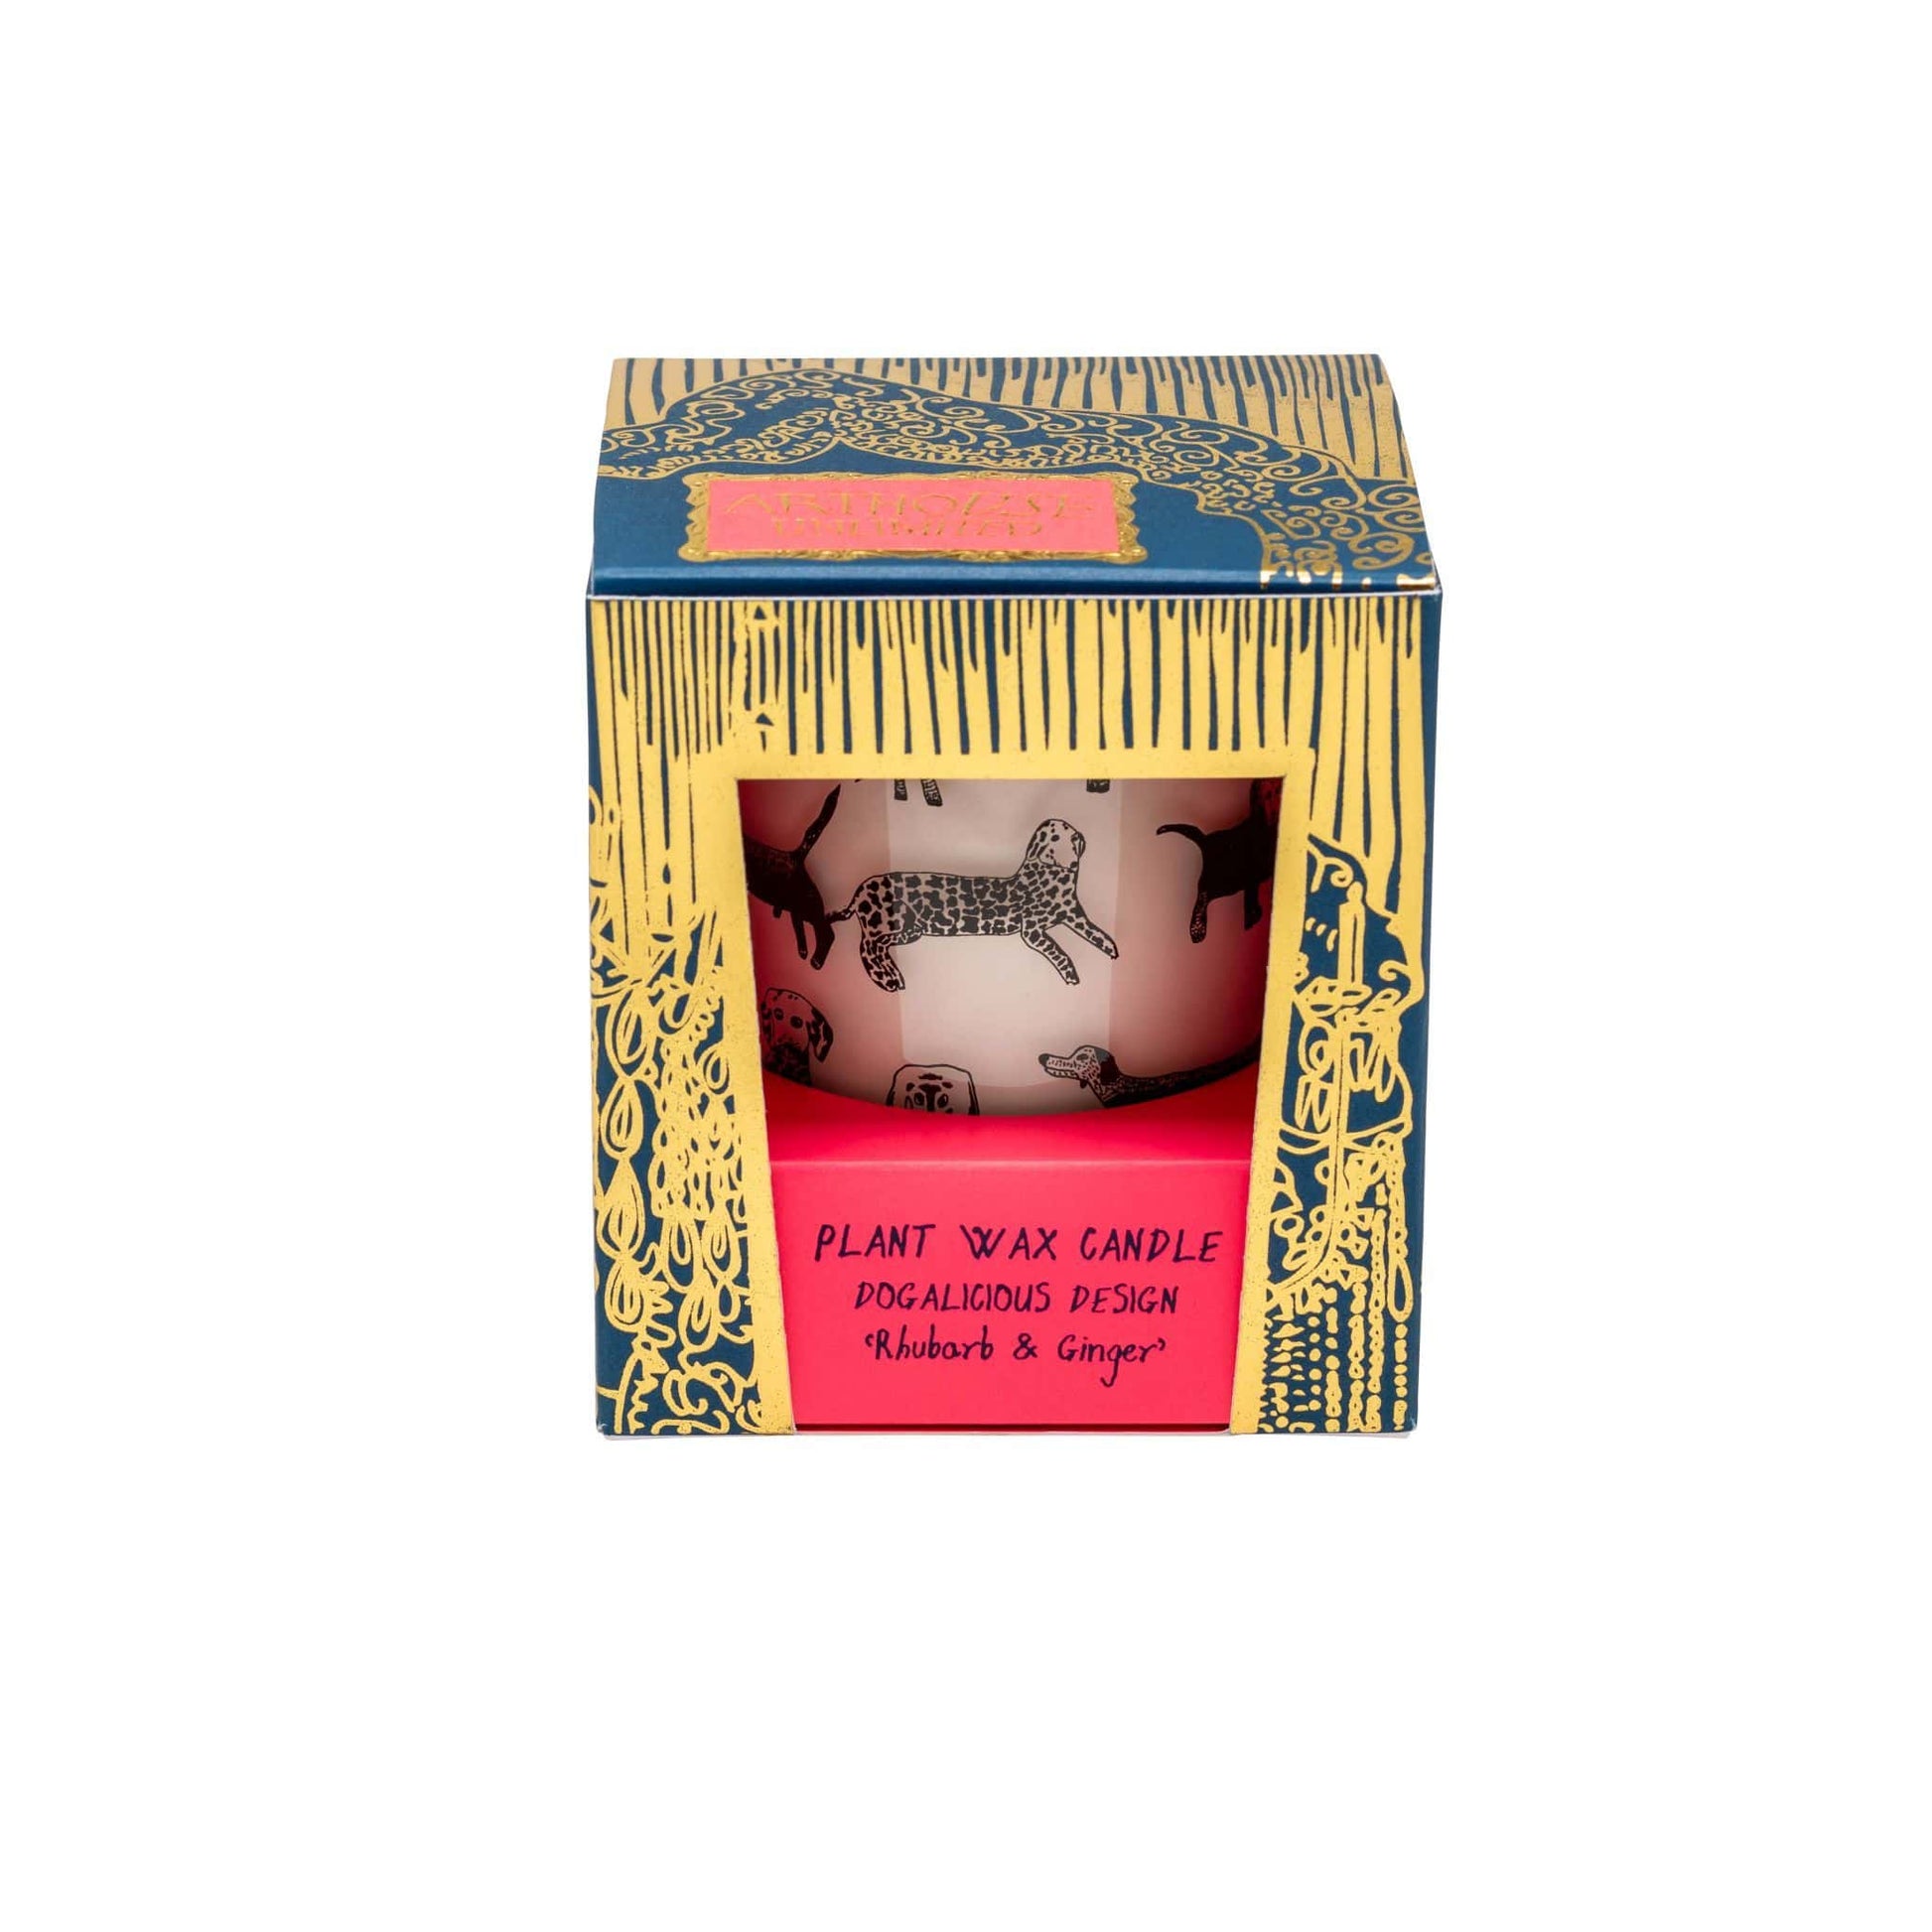 Plant Wax Candle  Rhubarb & Ginger  Dogs Design - front packaging